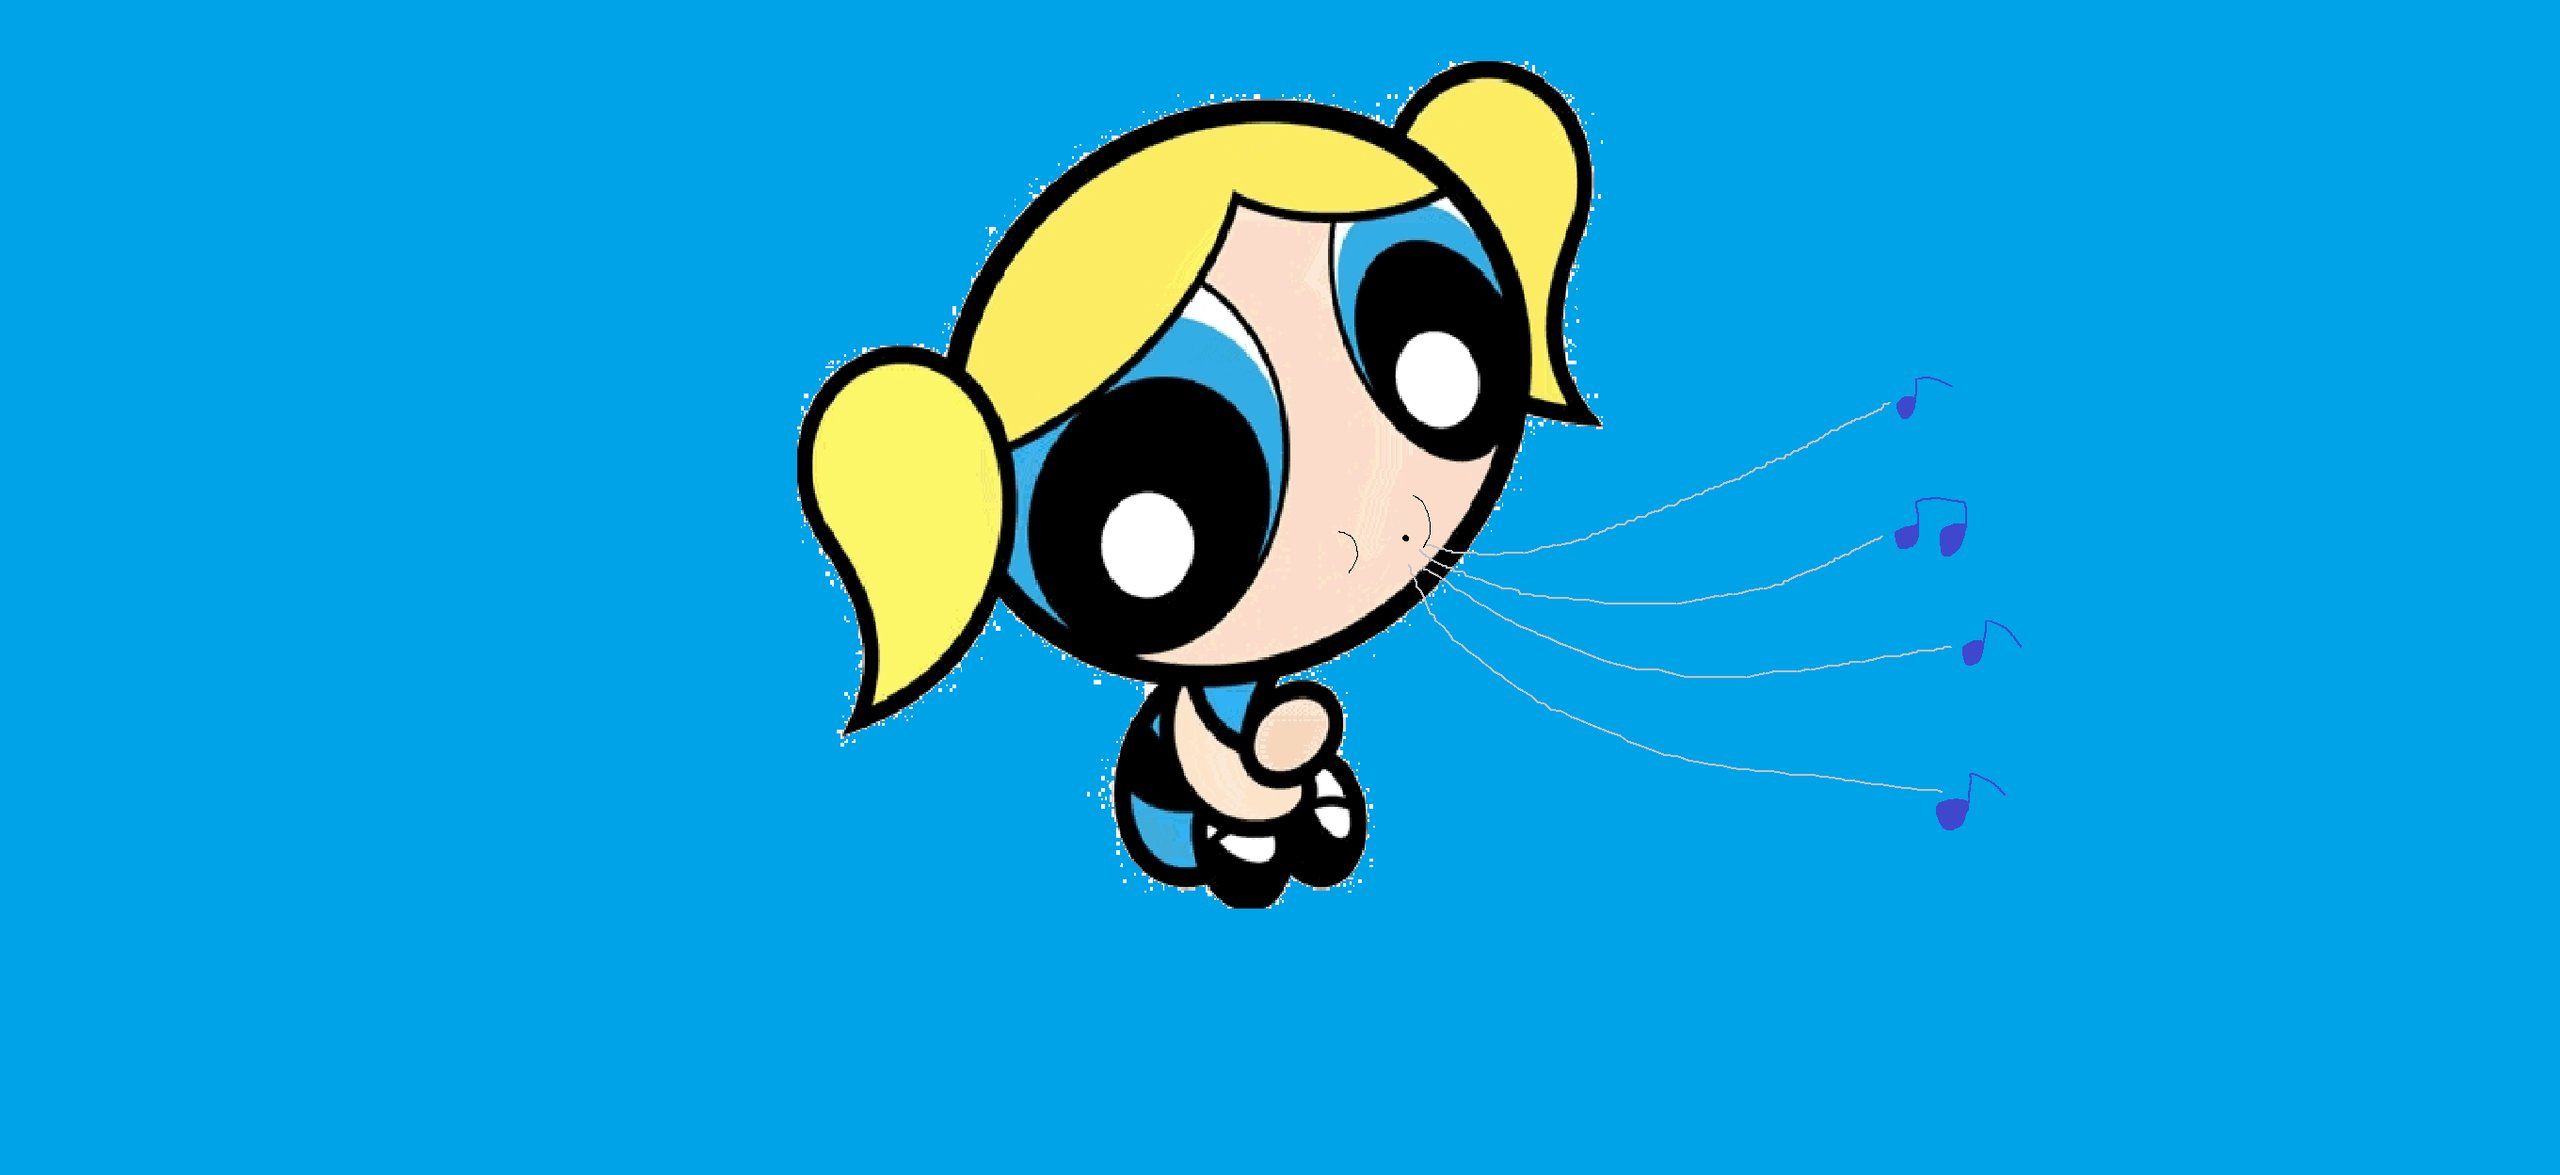 Bubbles blowing bubbles in the wind - The Powerpuff Girls